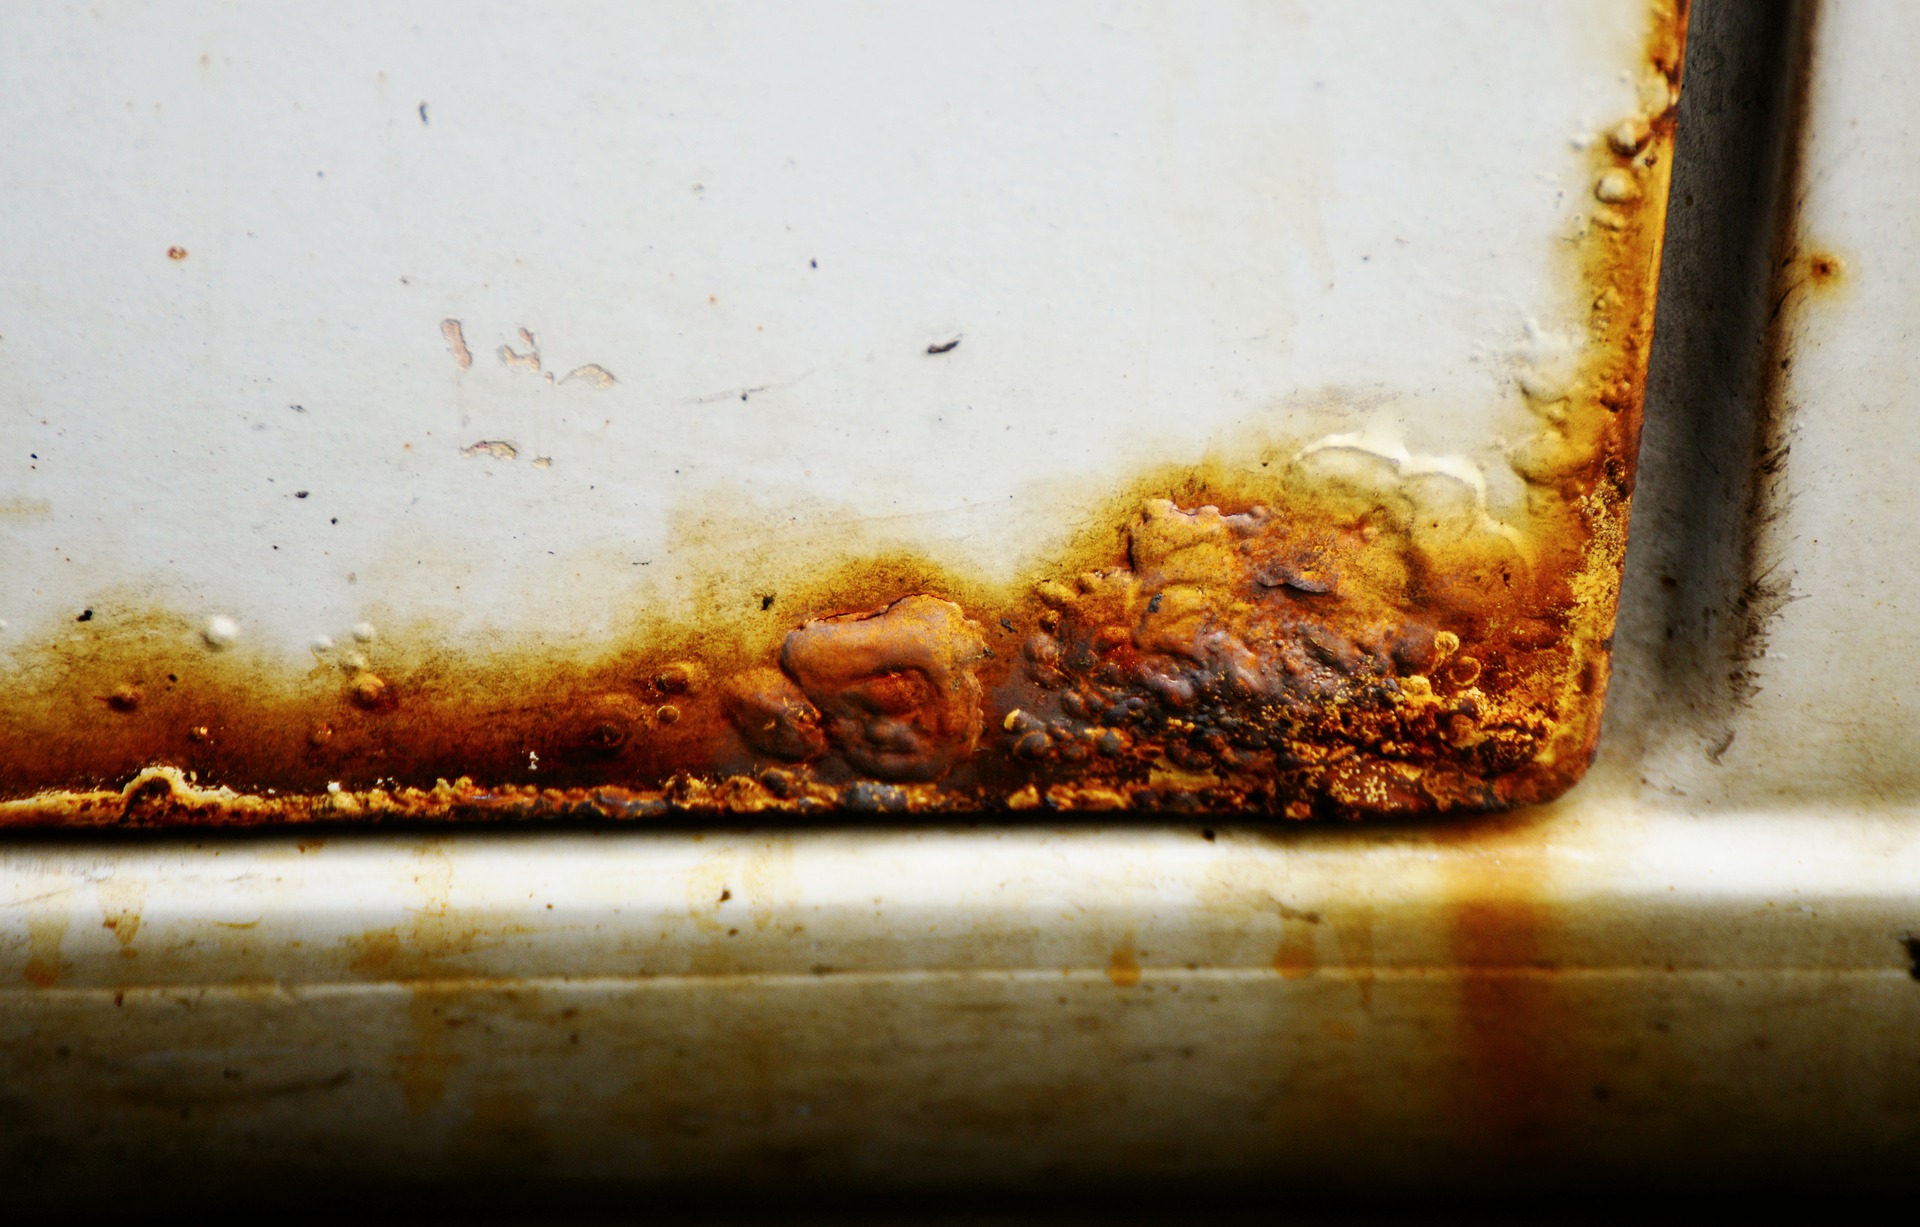 The picture shows a part of a car door with rusty spots